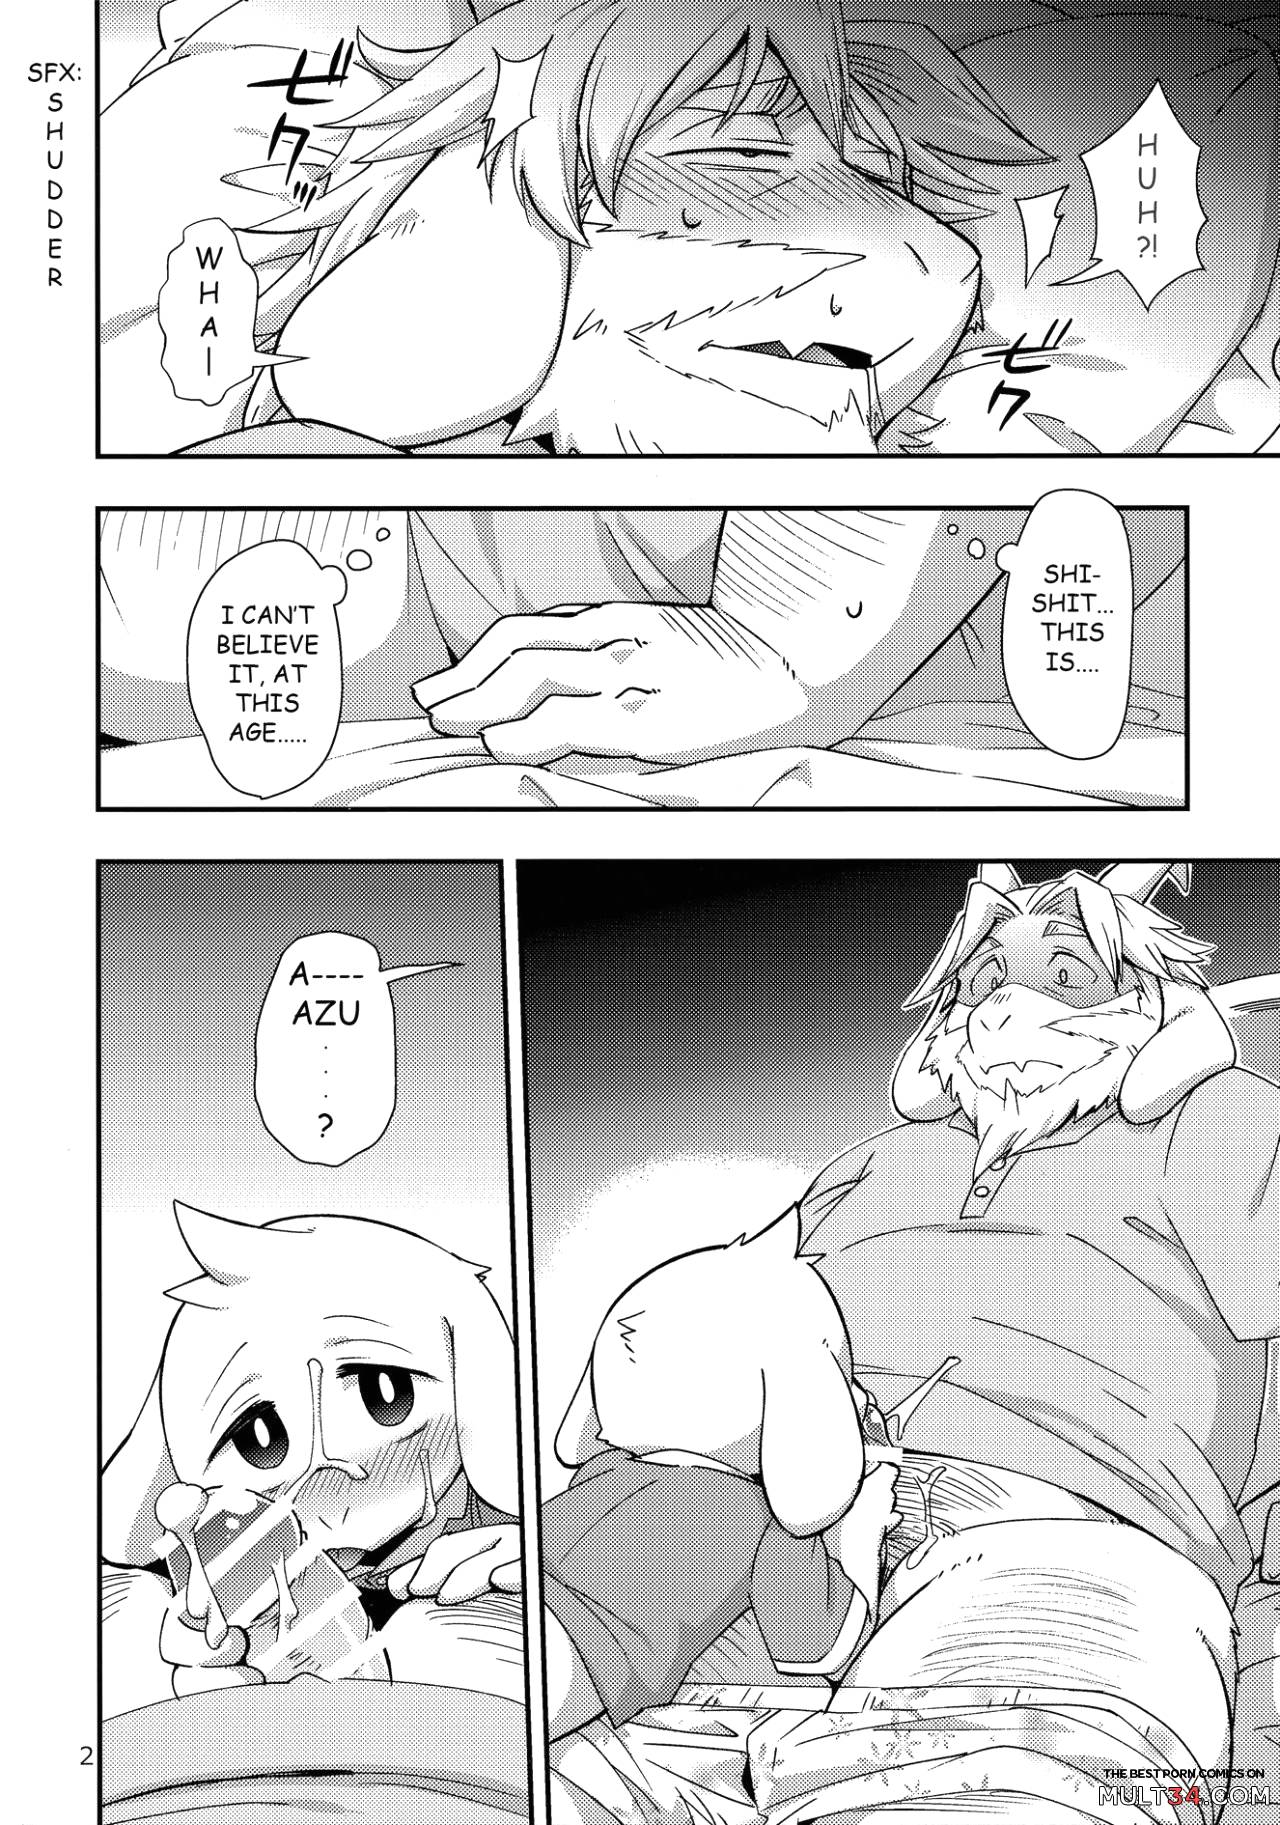 little cock sucker or something page 2